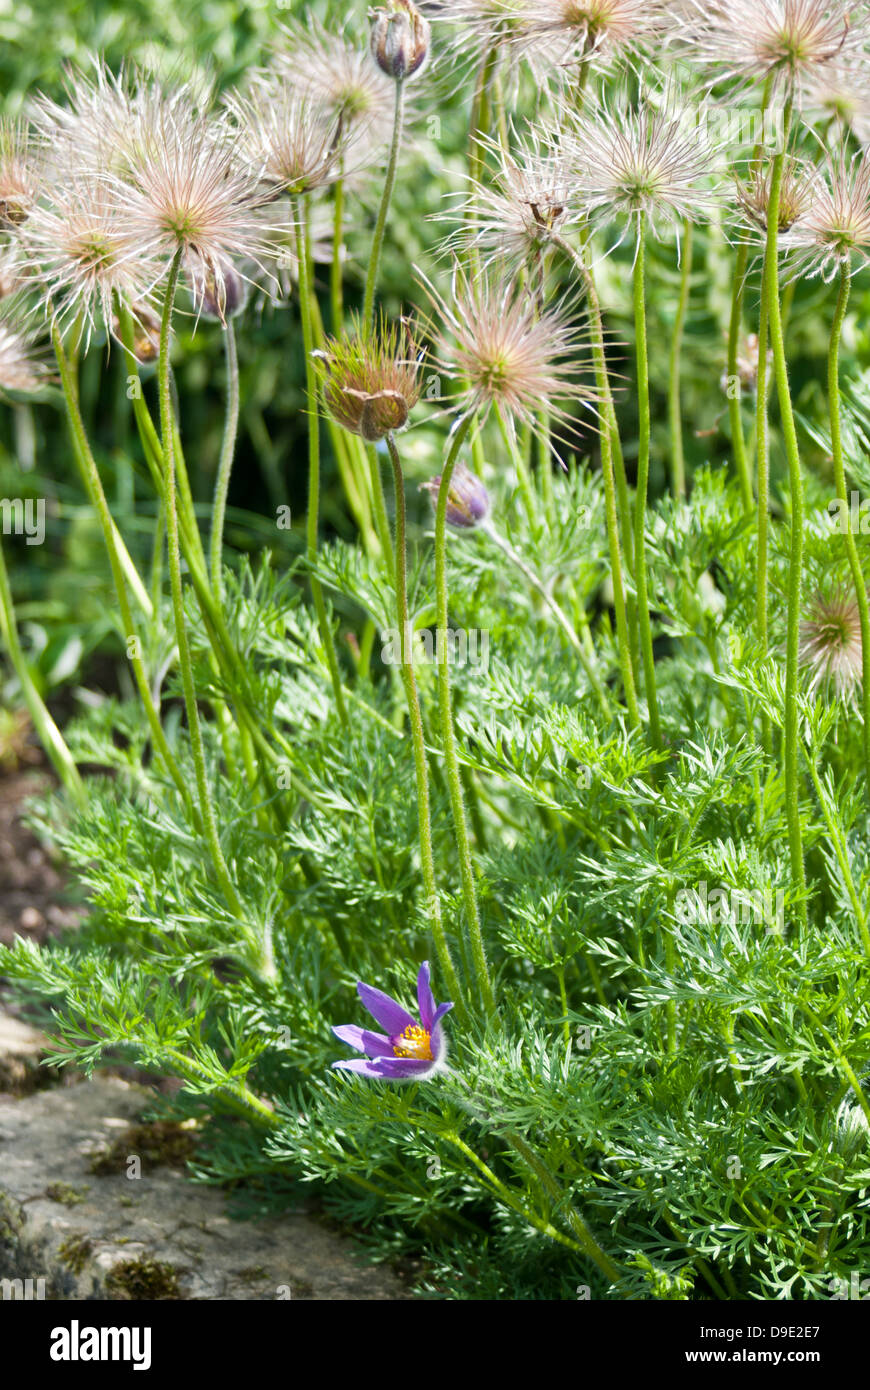 Pulsatilla vulgaris (Pasque flower), with flower, foliage and seed head. Stock Photo